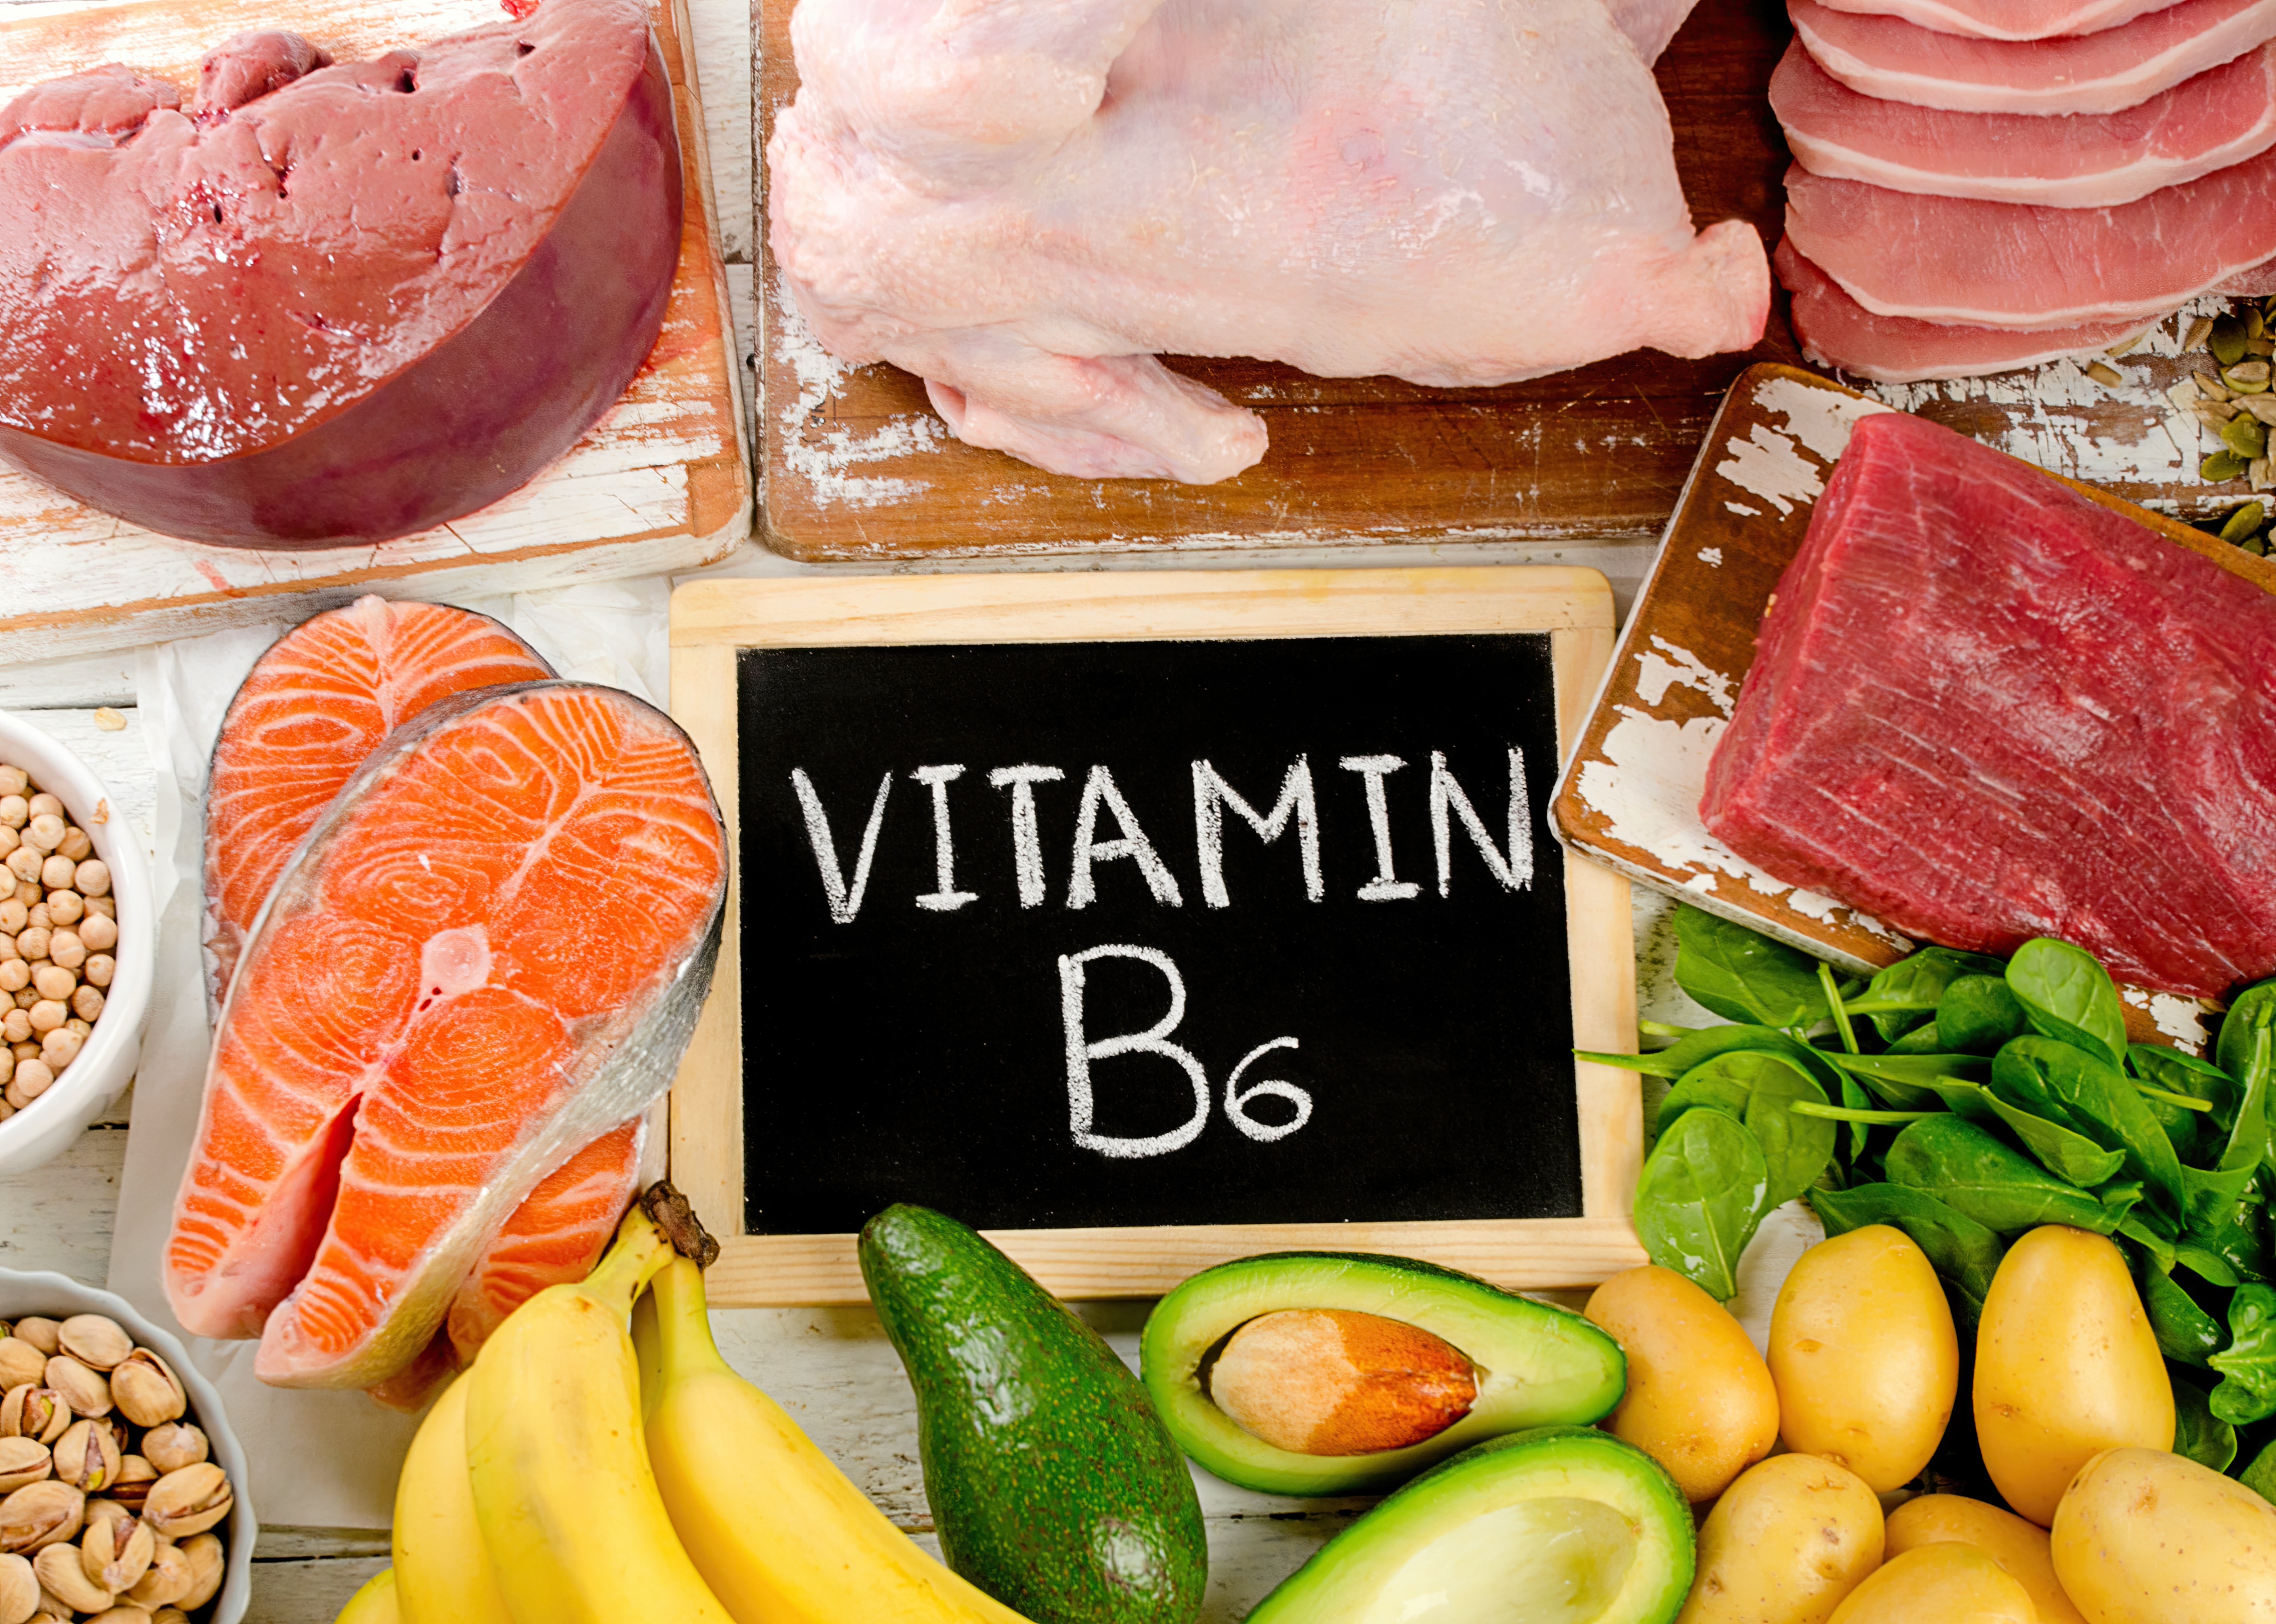 Foods with Vitamin B6